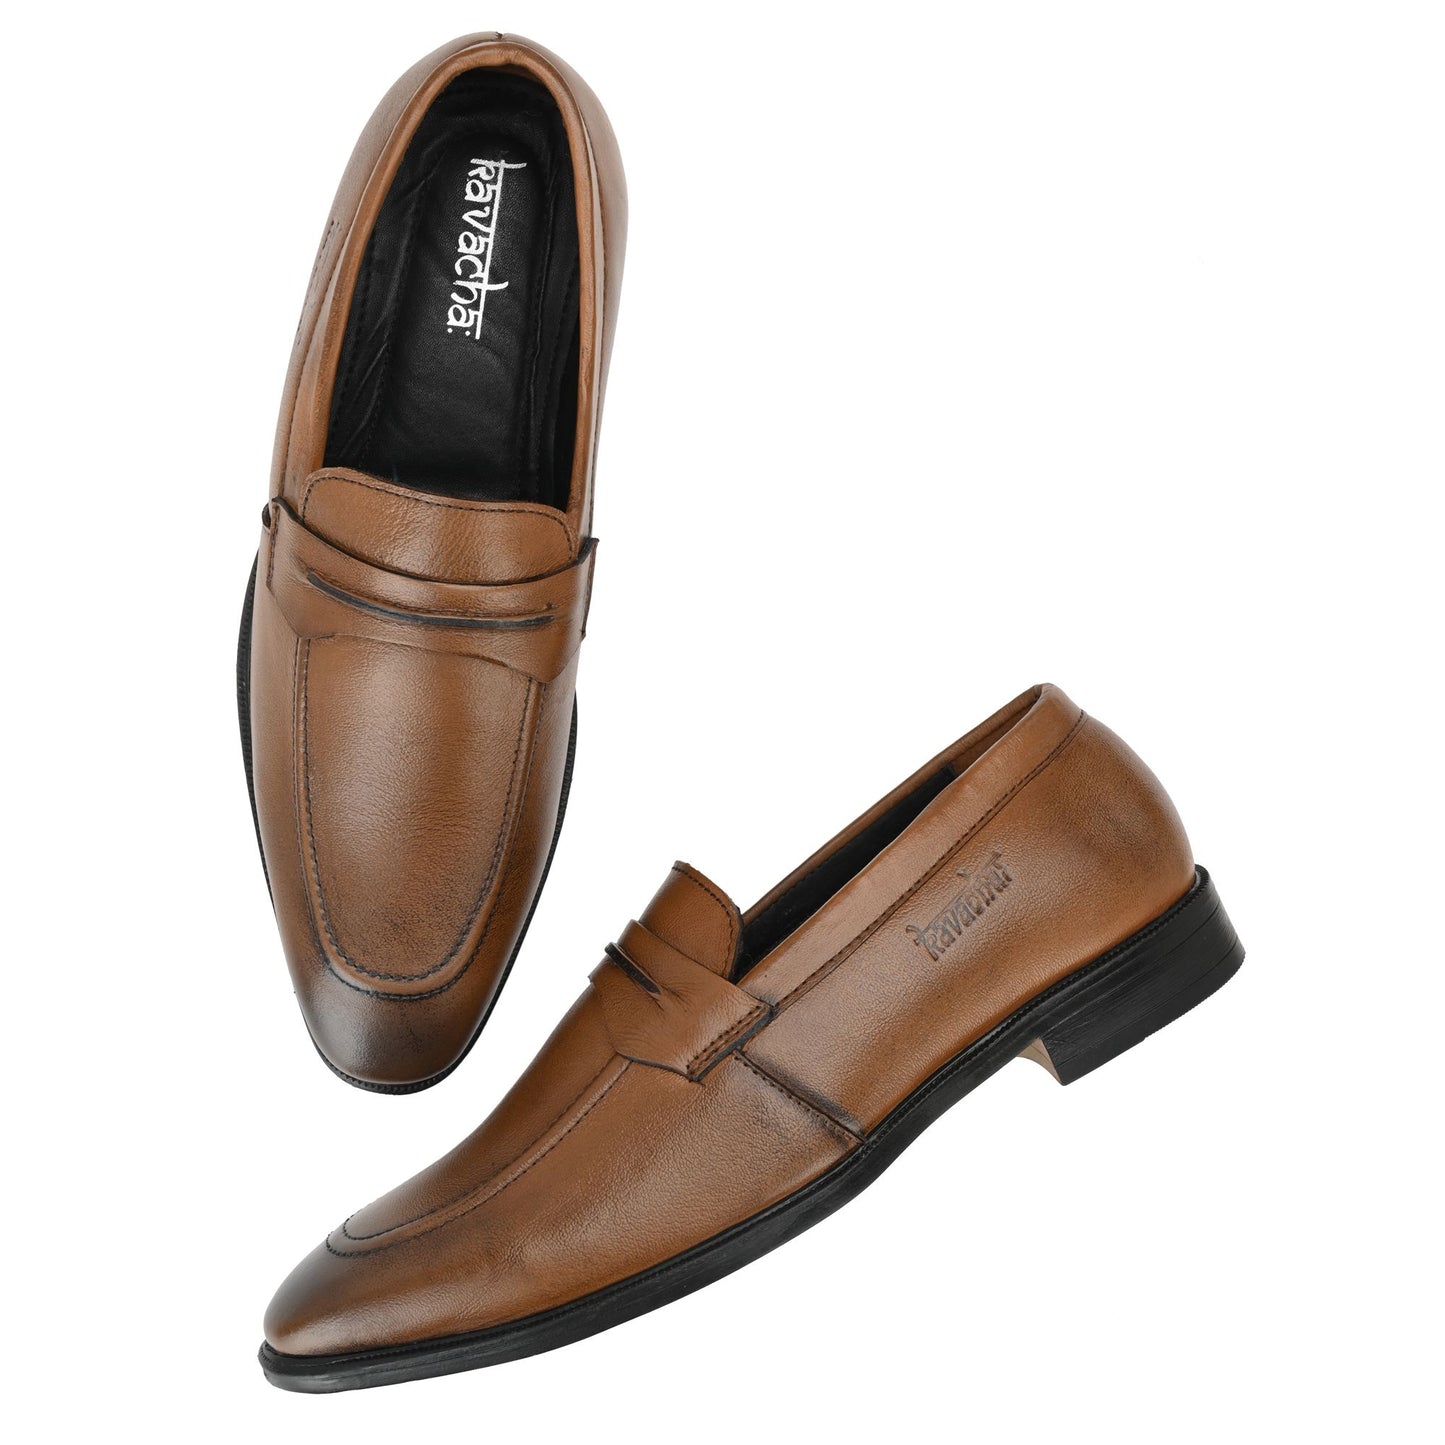 Slip-on Pure Leather Shoes